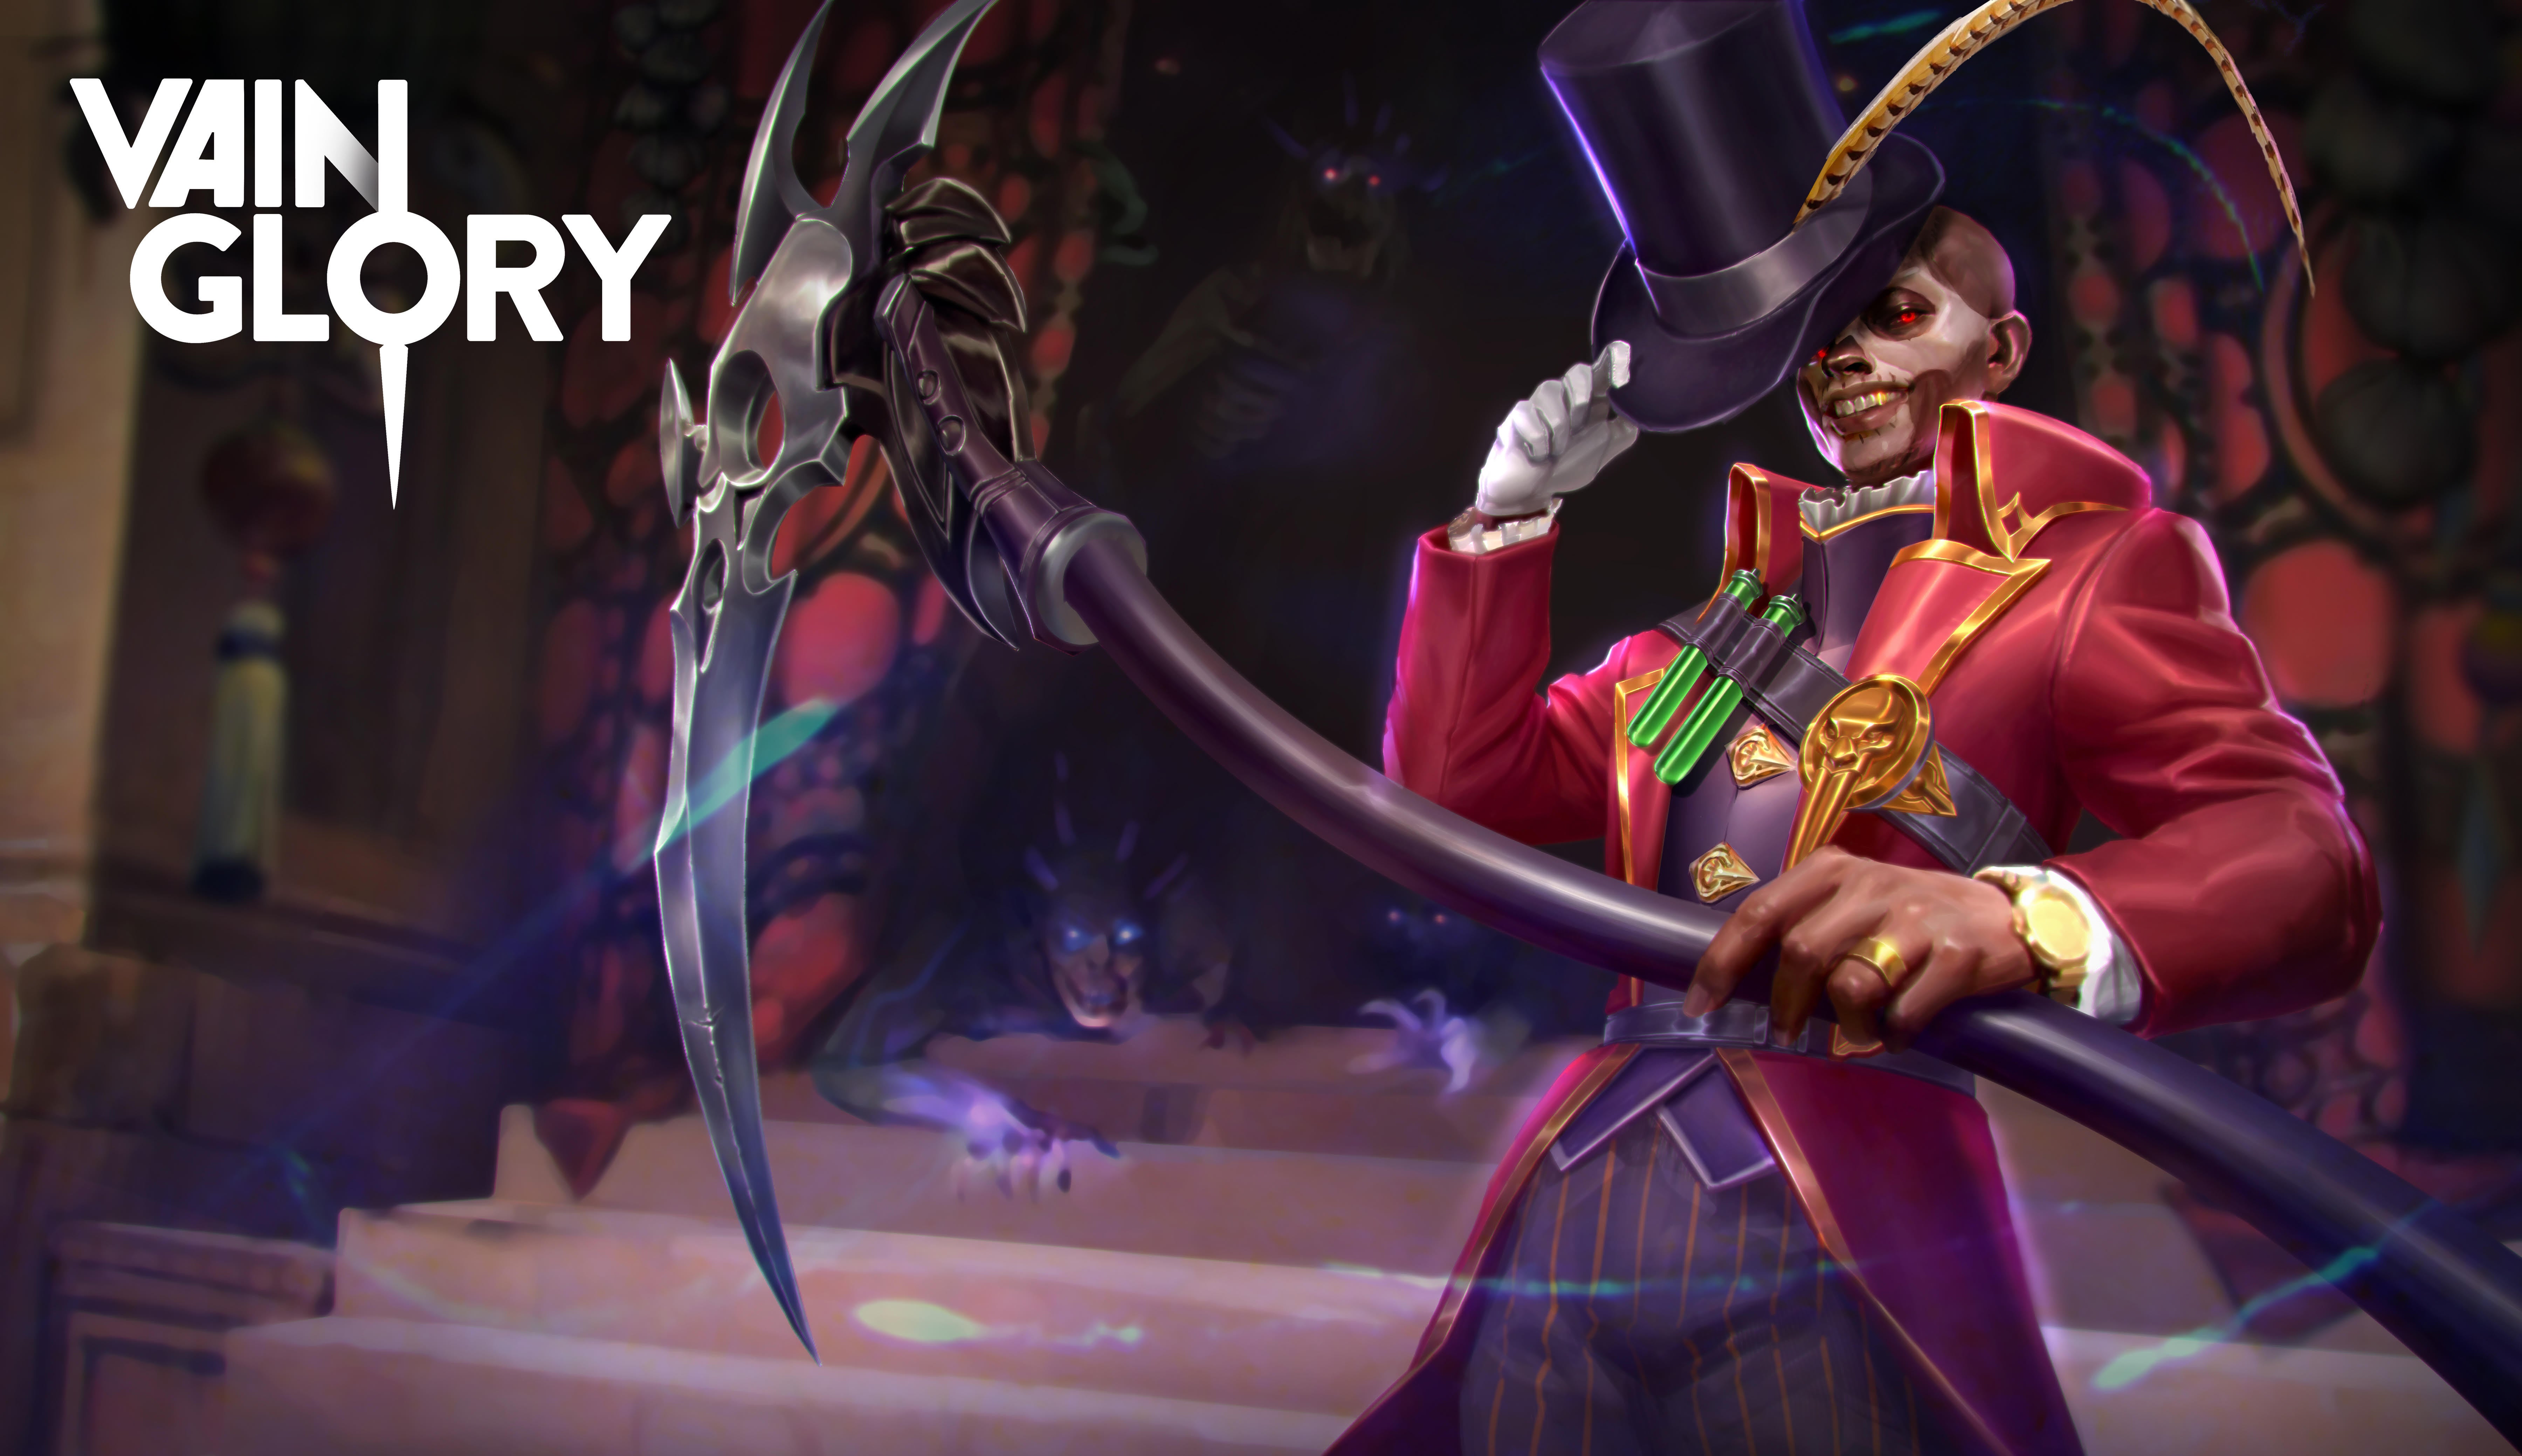 Vainglory esports title adds new hero, additional skins and in-game events in latest update